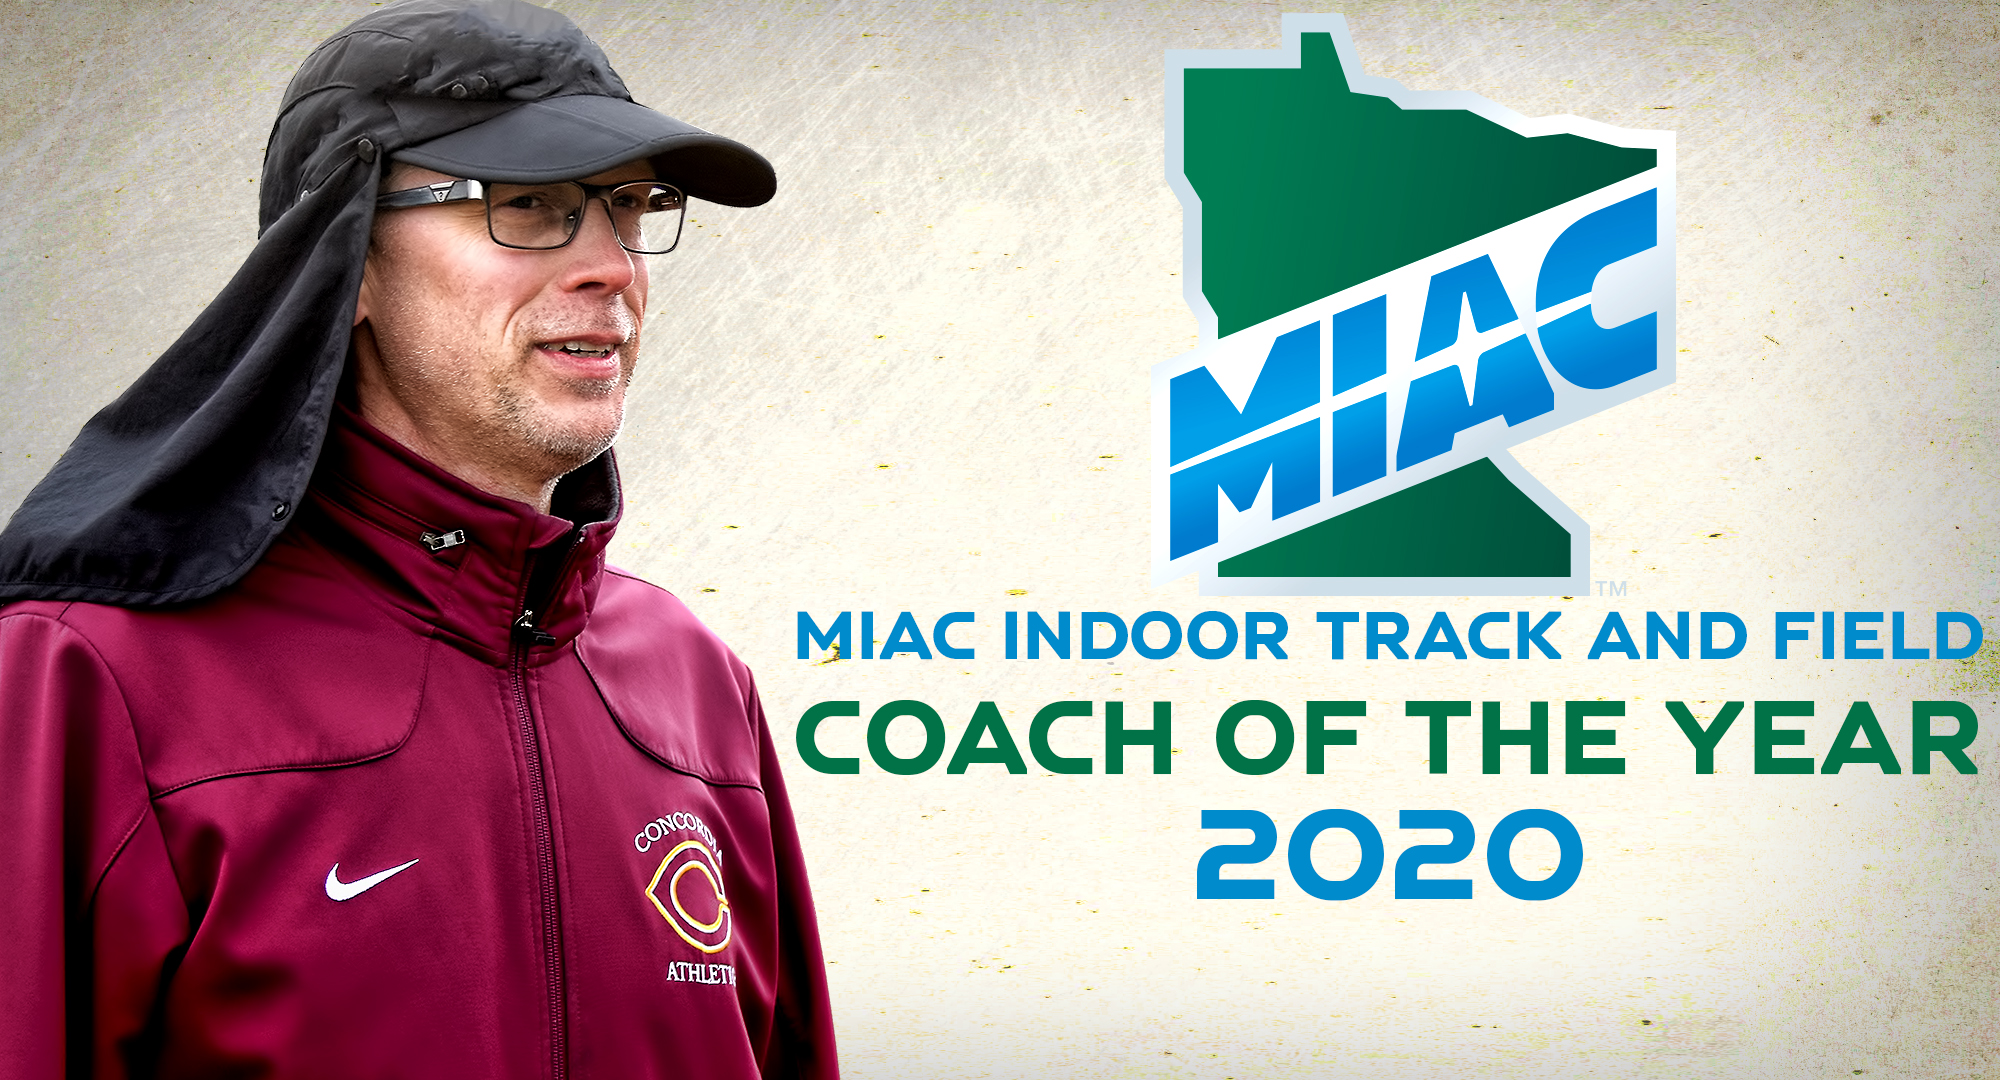 Garrick Larson was named the MIAC Indoor Track and Field Coach of the Year for guiding the Cobbers to a second-place finish at the MIAC Indoor Meet.